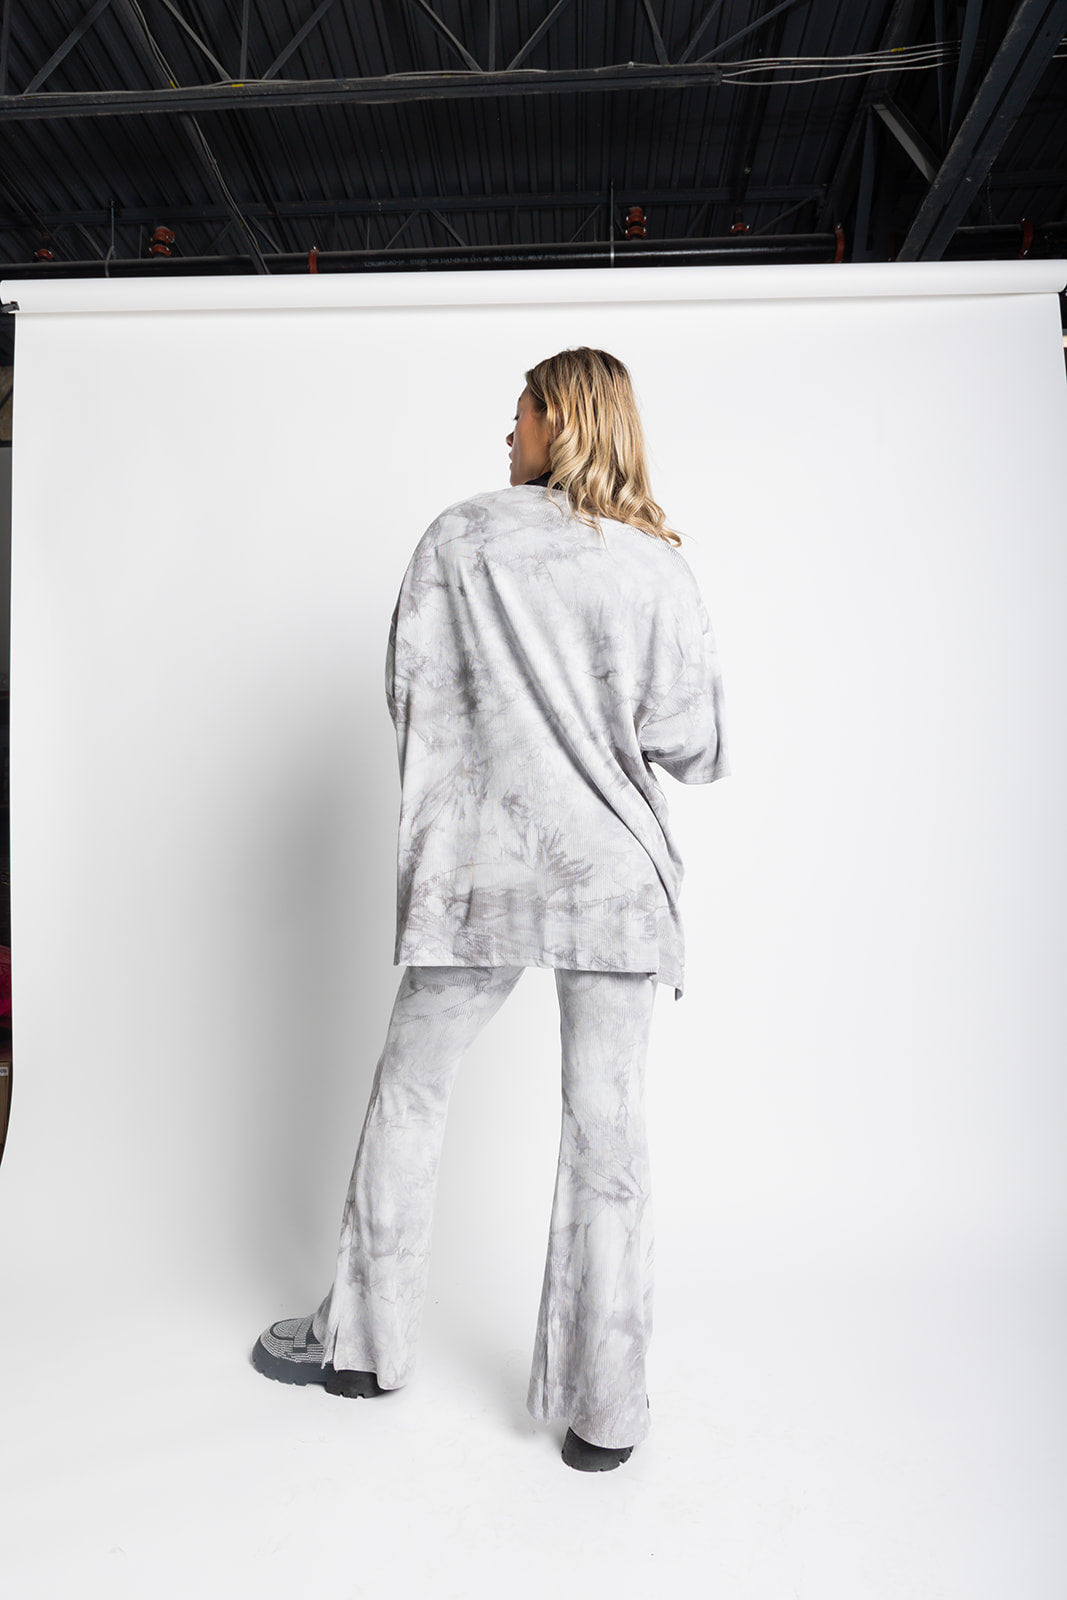 Day Dreamer Ribbed Pant Set - Marble [S-3X]